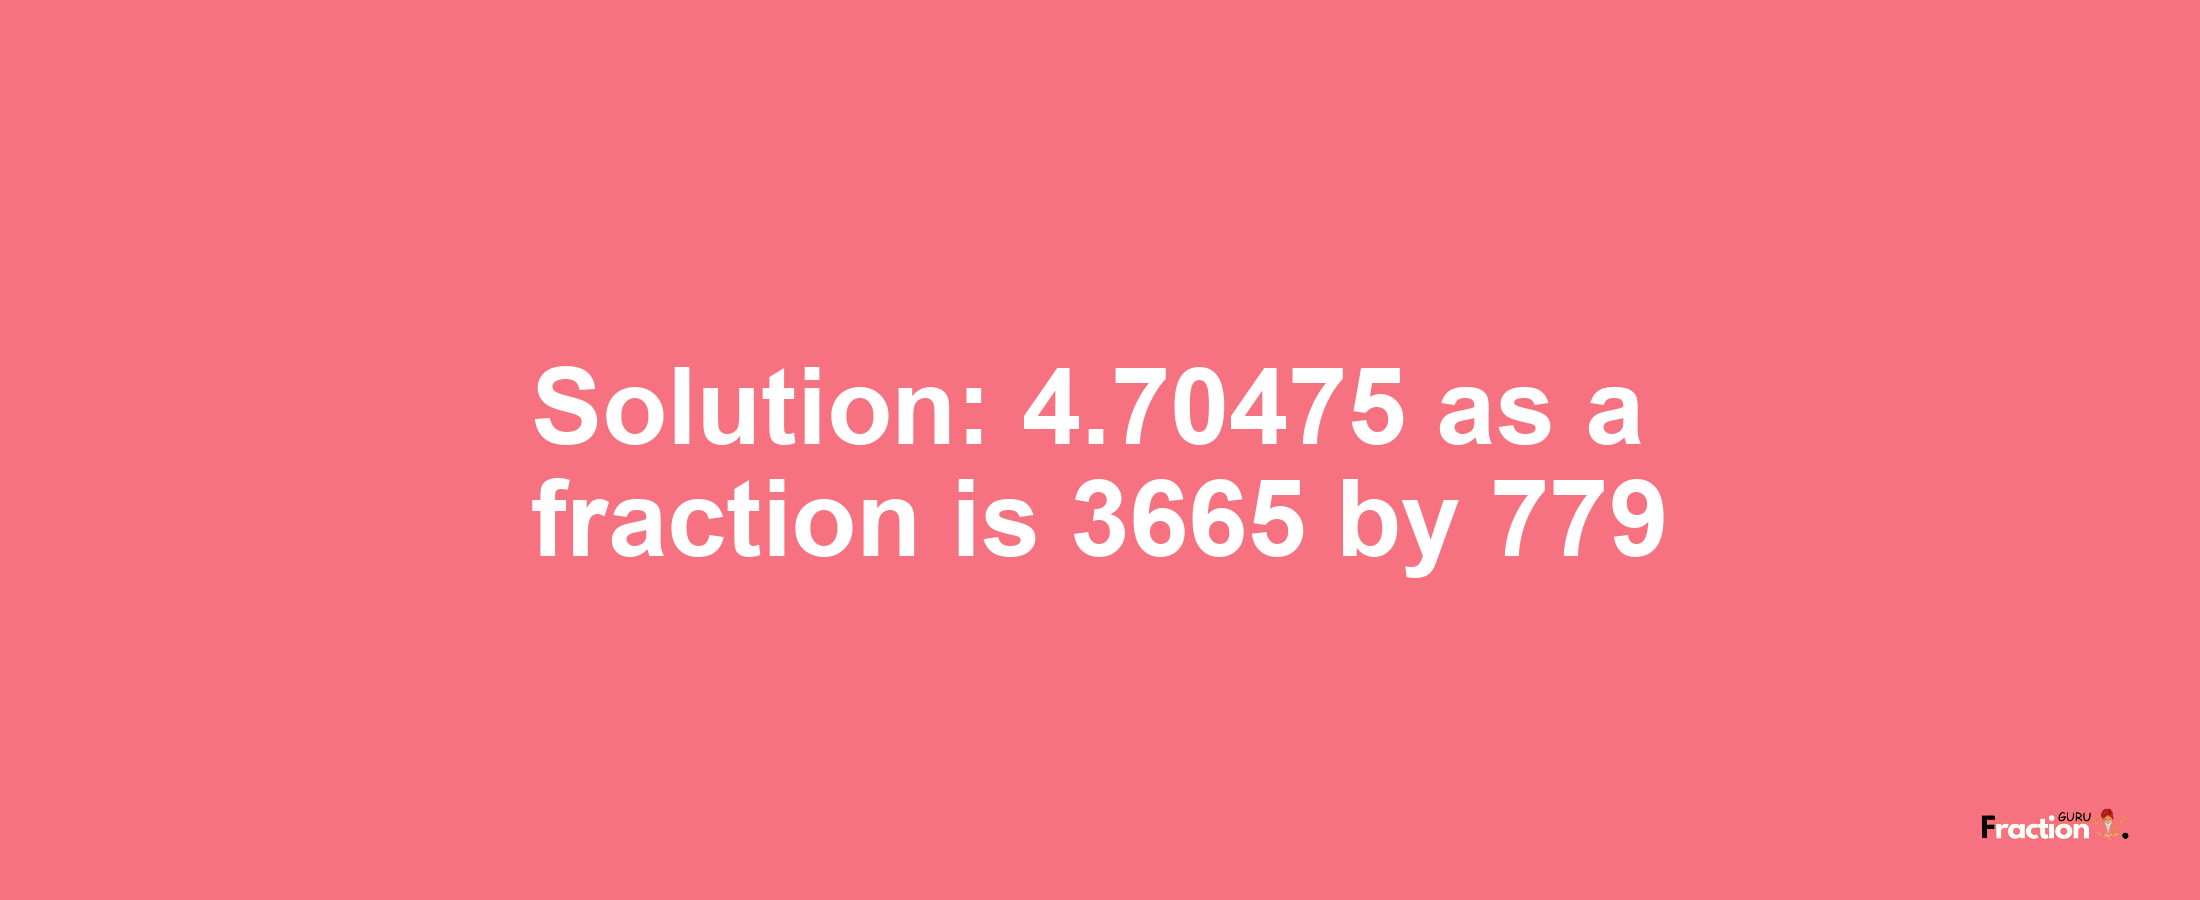 Solution:4.70475 as a fraction is 3665/779